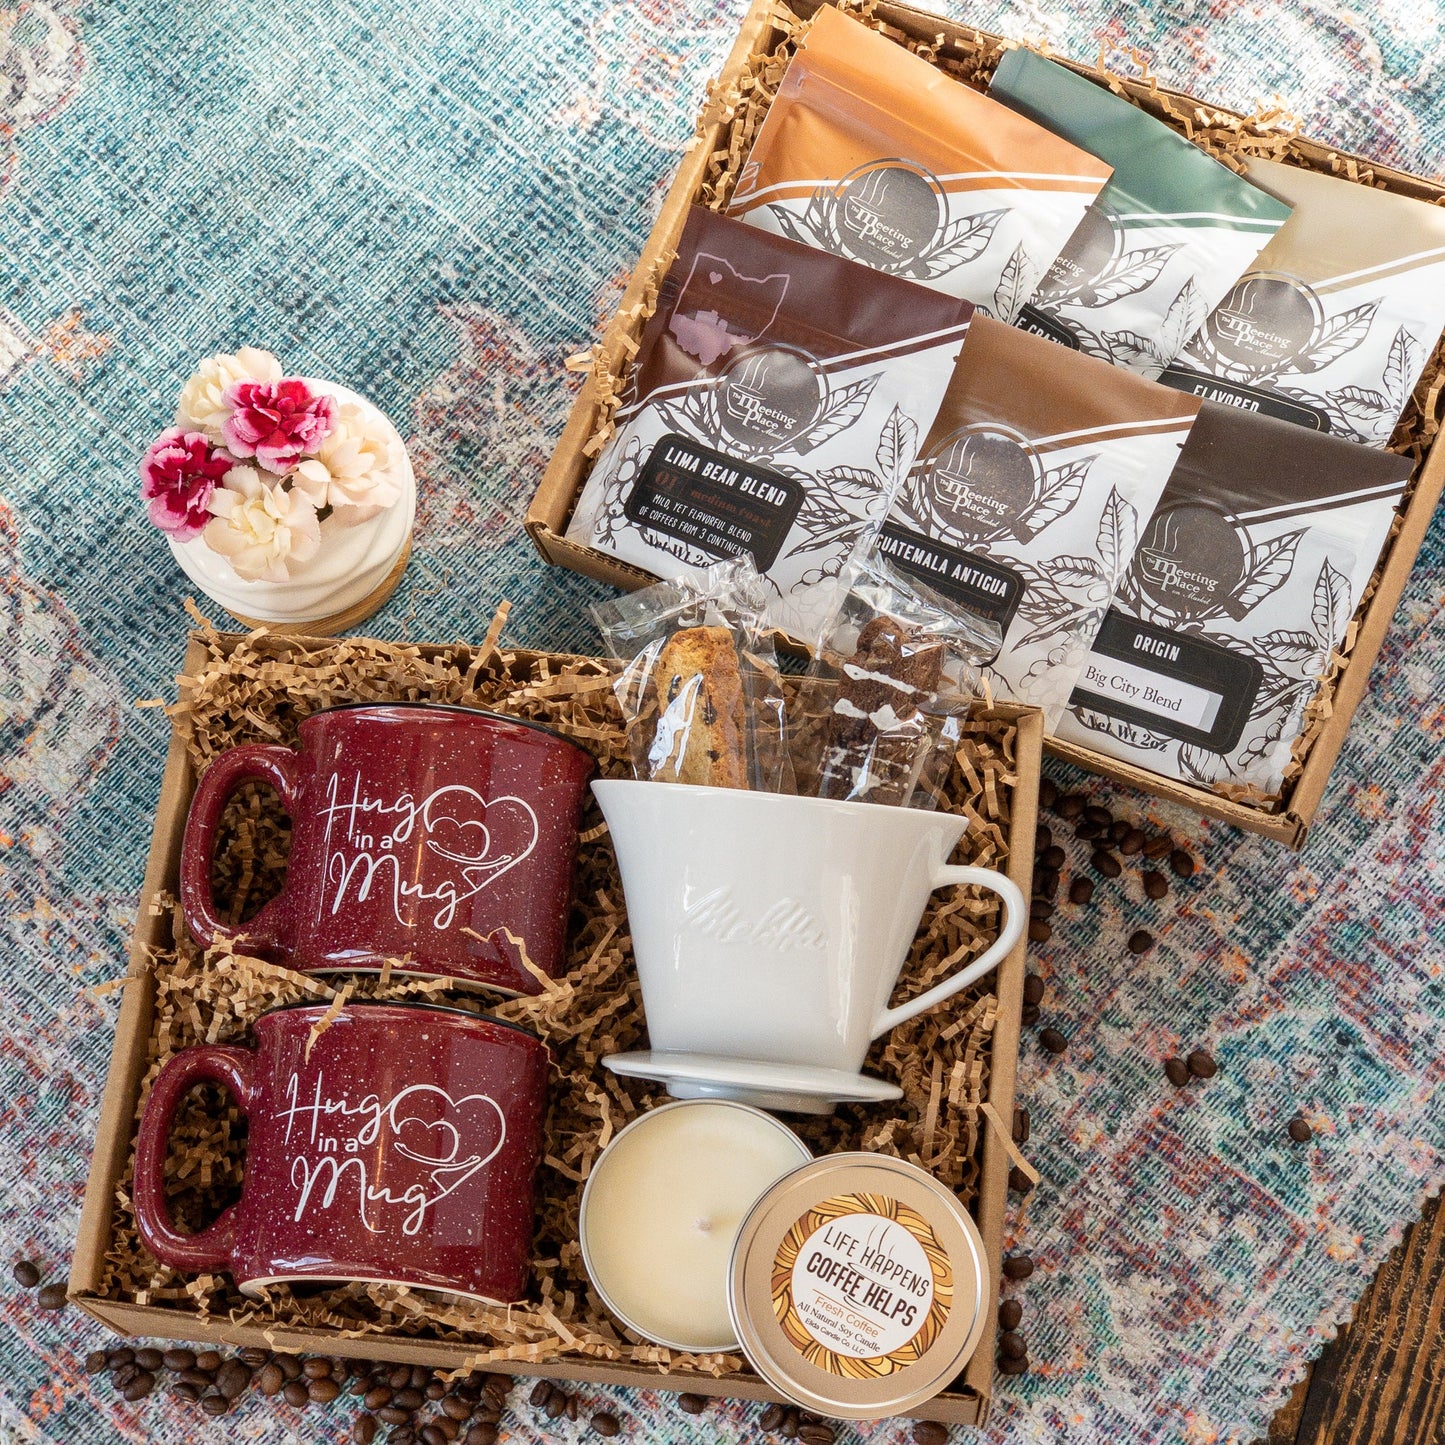 Date Night Coffee Gift Box, Learn to Make a Pour Over Coffee Valentine's Day Gift Basket - The Meeting Place on Market